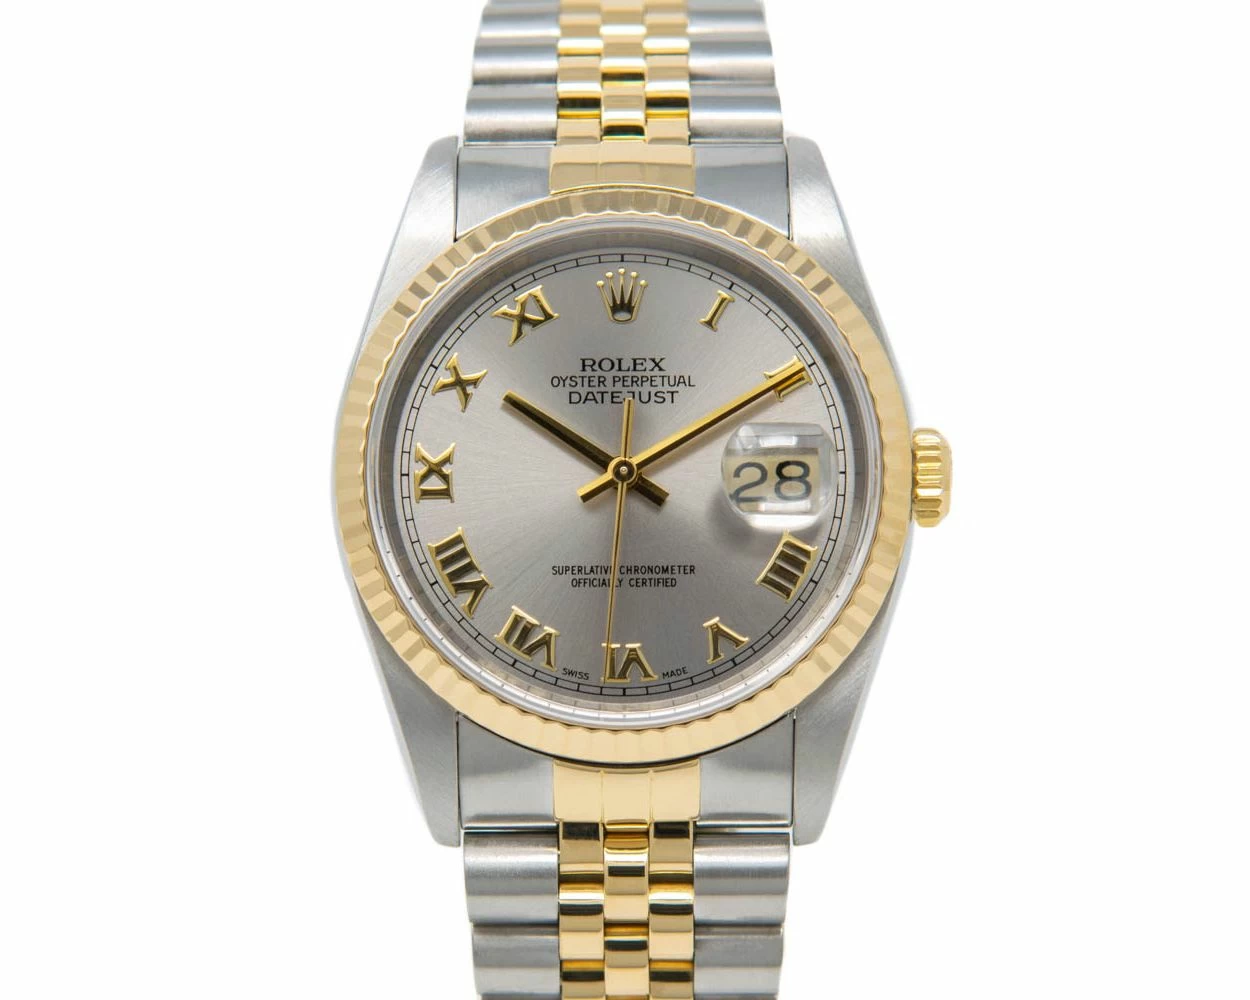 Rolex Datejust Silver Dial 16233 Wristwatch for Sale